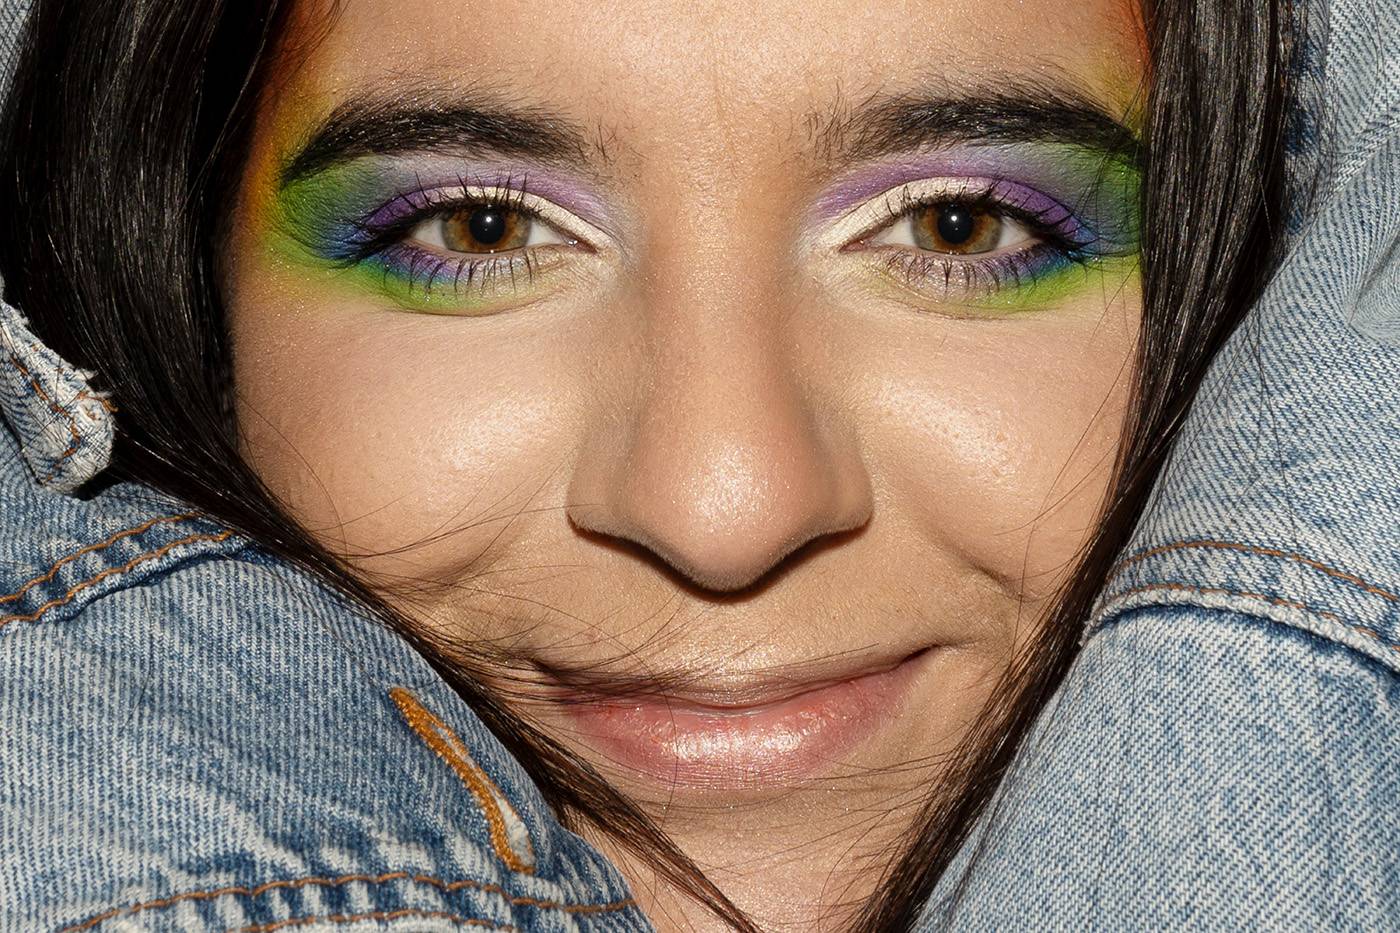 Makeup Art Project For LGBT Pride Month